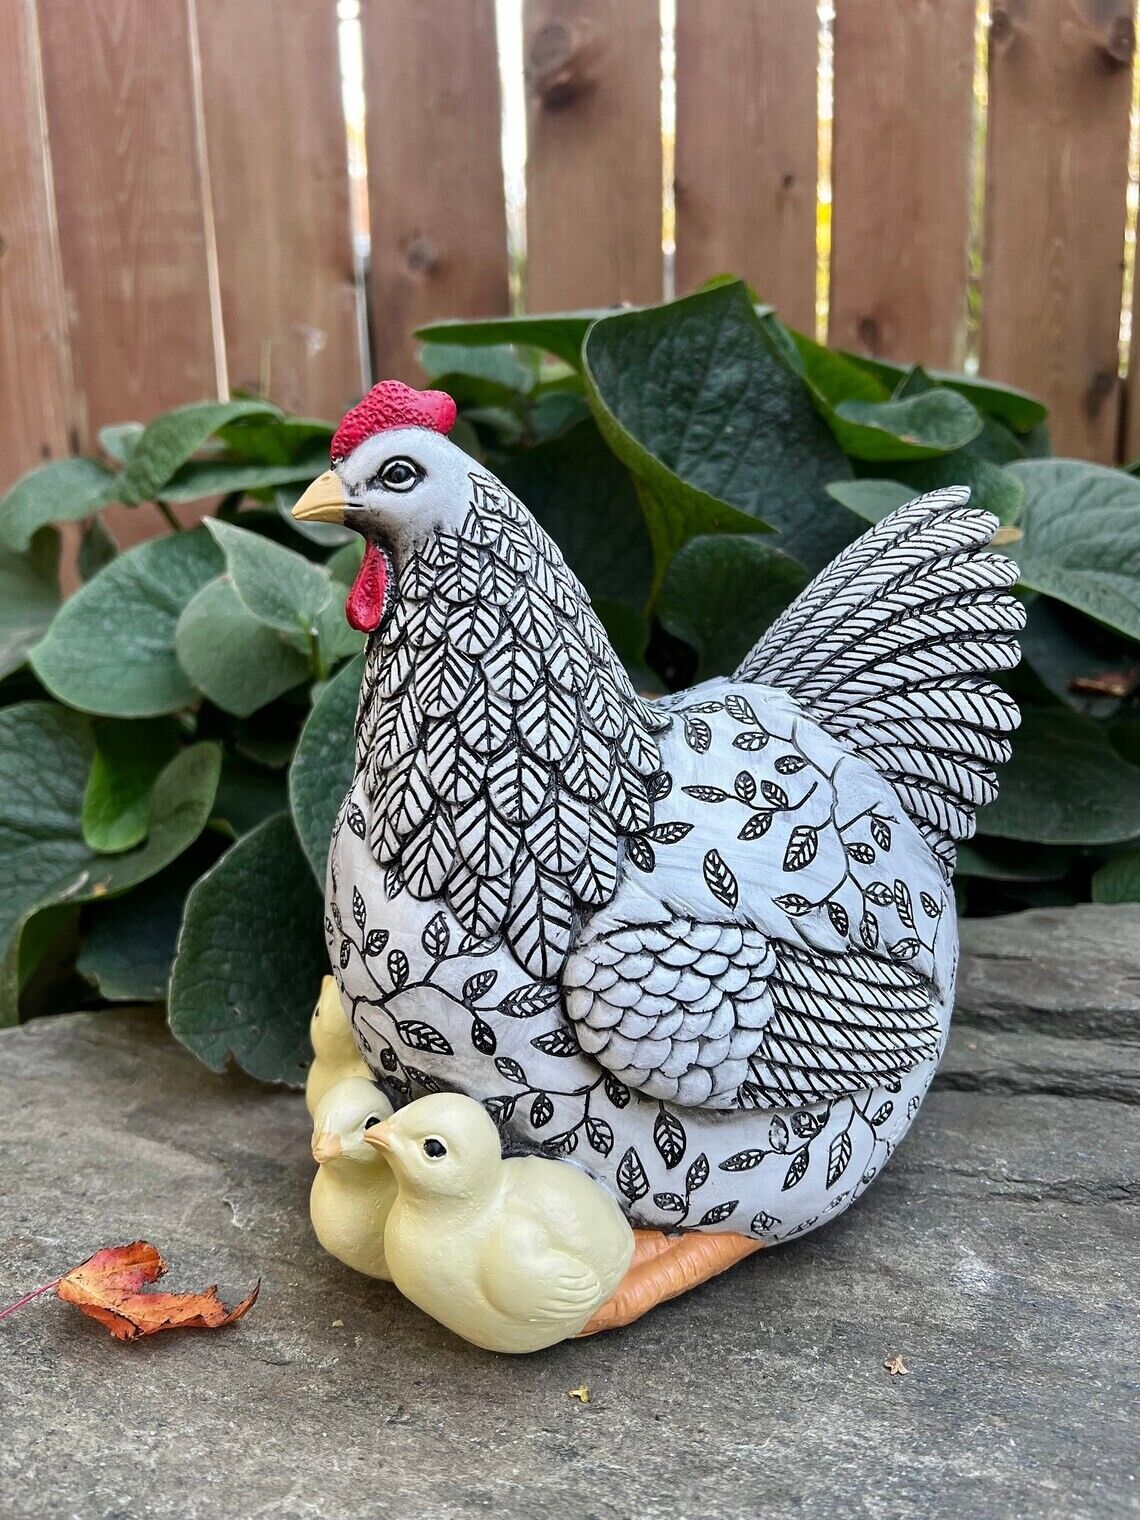 Mother Hen and Baby Chicks Figurine Statue Birds Resin, 9 inches Hx8 Indoor Out